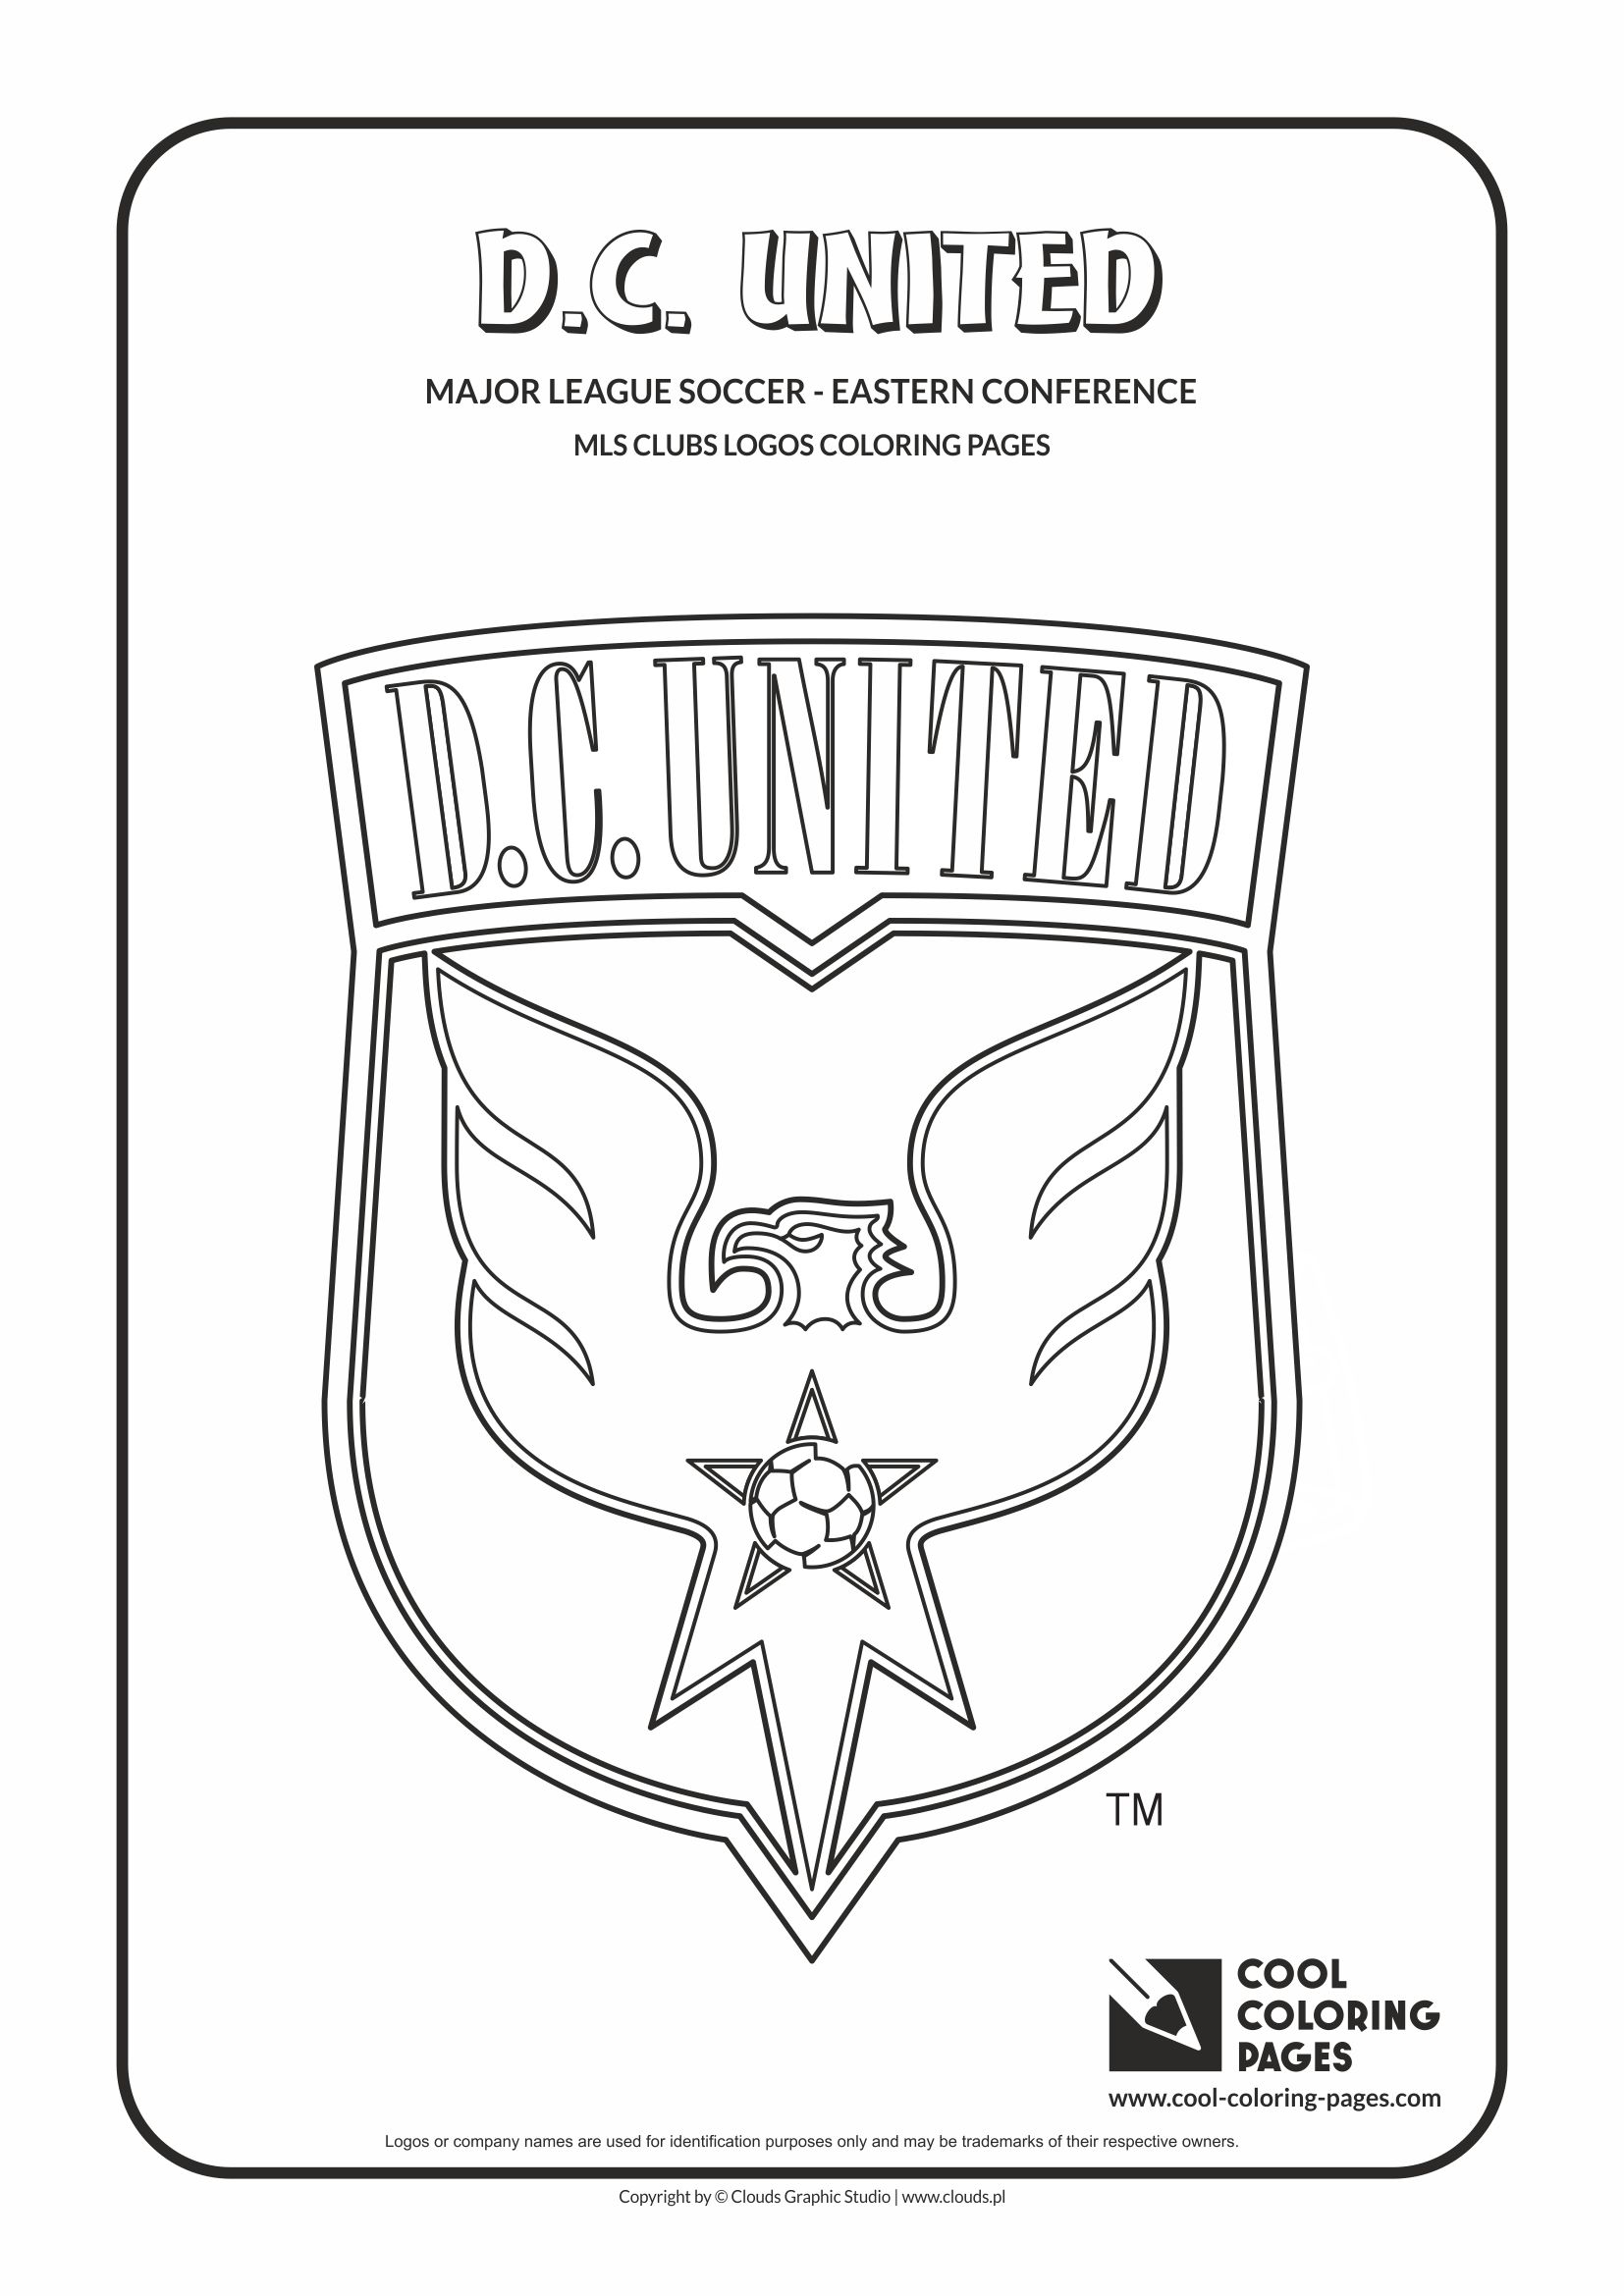 Mls Soccer Clubs Logos Coloring Pages Cool Major League Eastern